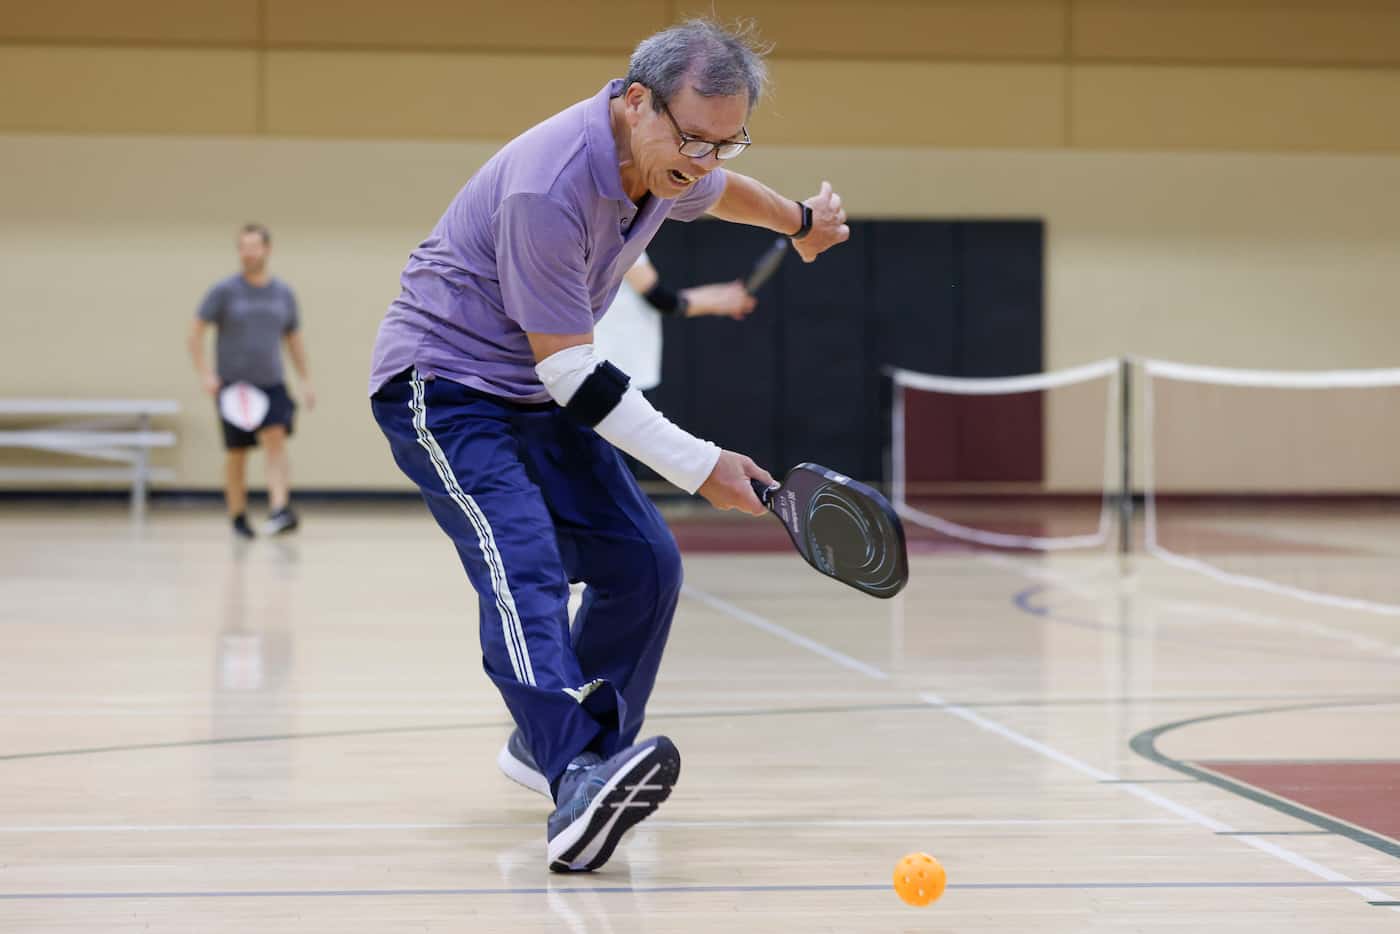 Tet Wu of Plano reacts as he misses to hit during a pickle ball game on Friday, May 26, 2023...